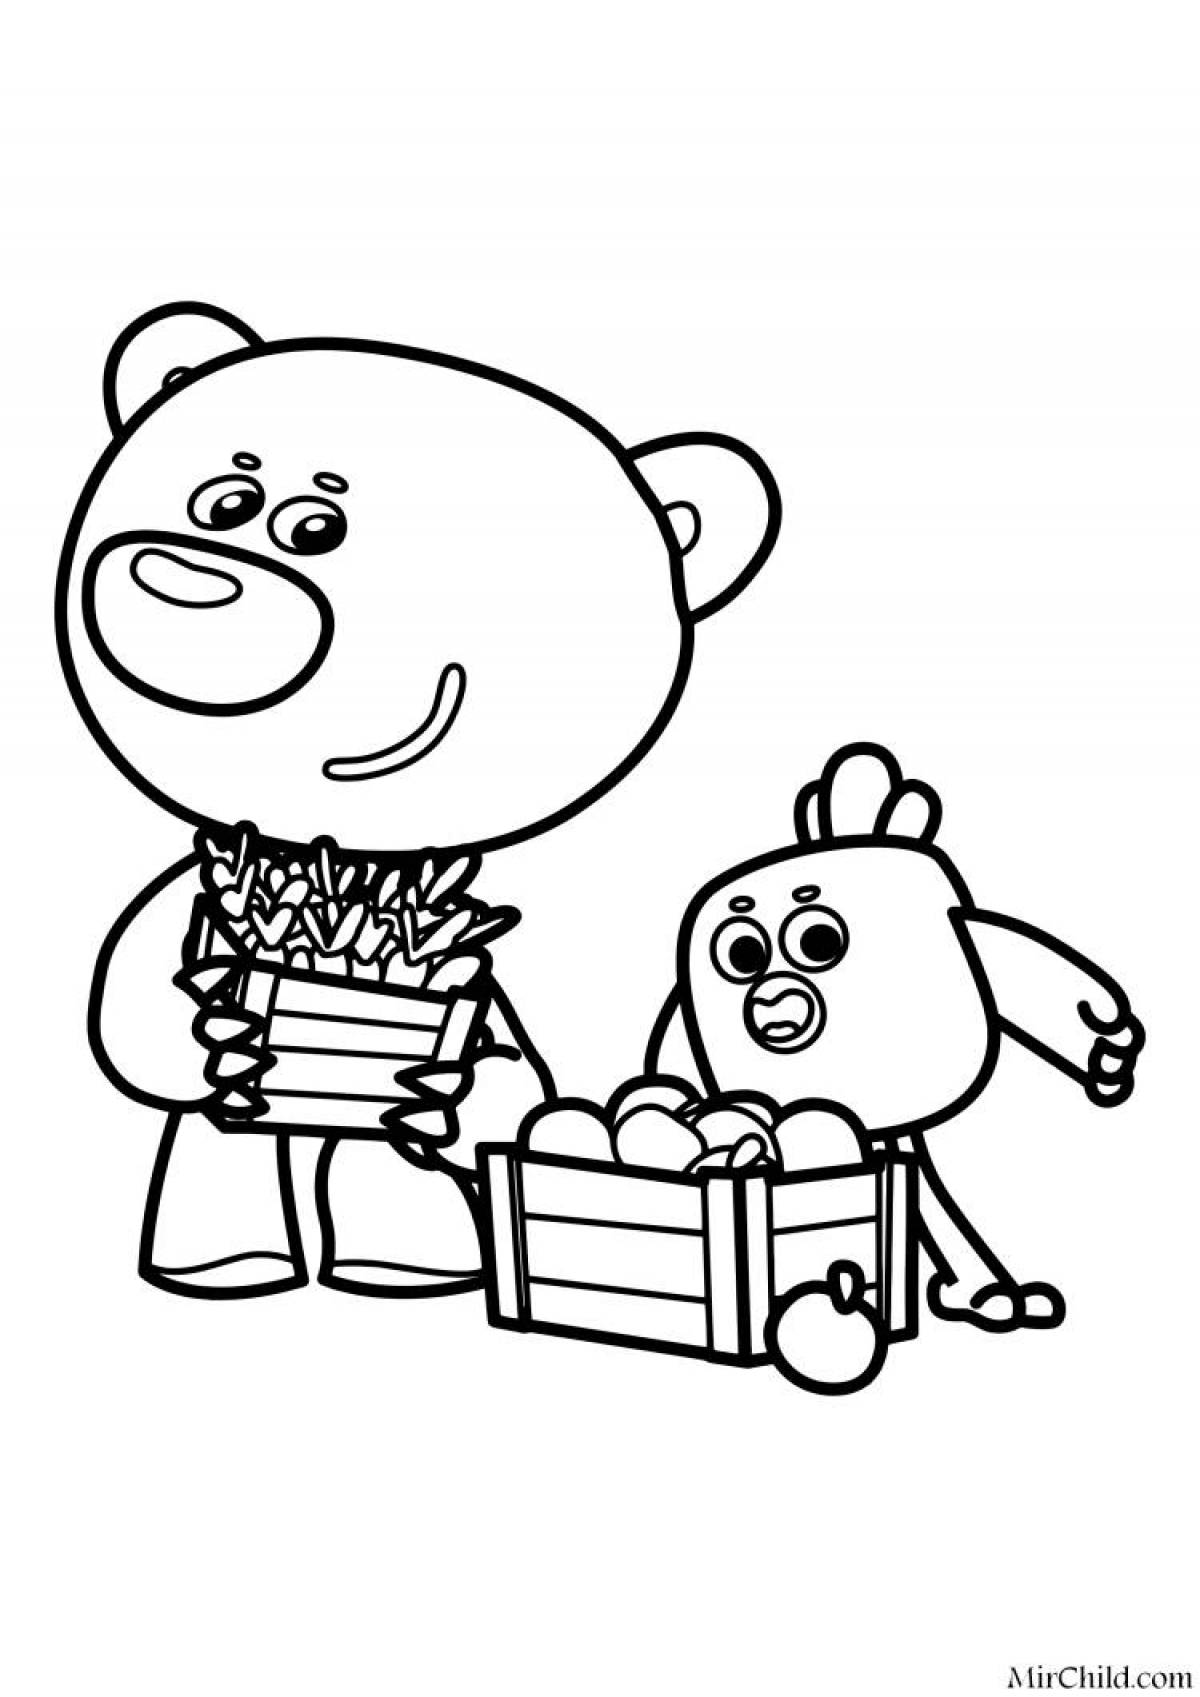 Smiling bears coloring pages